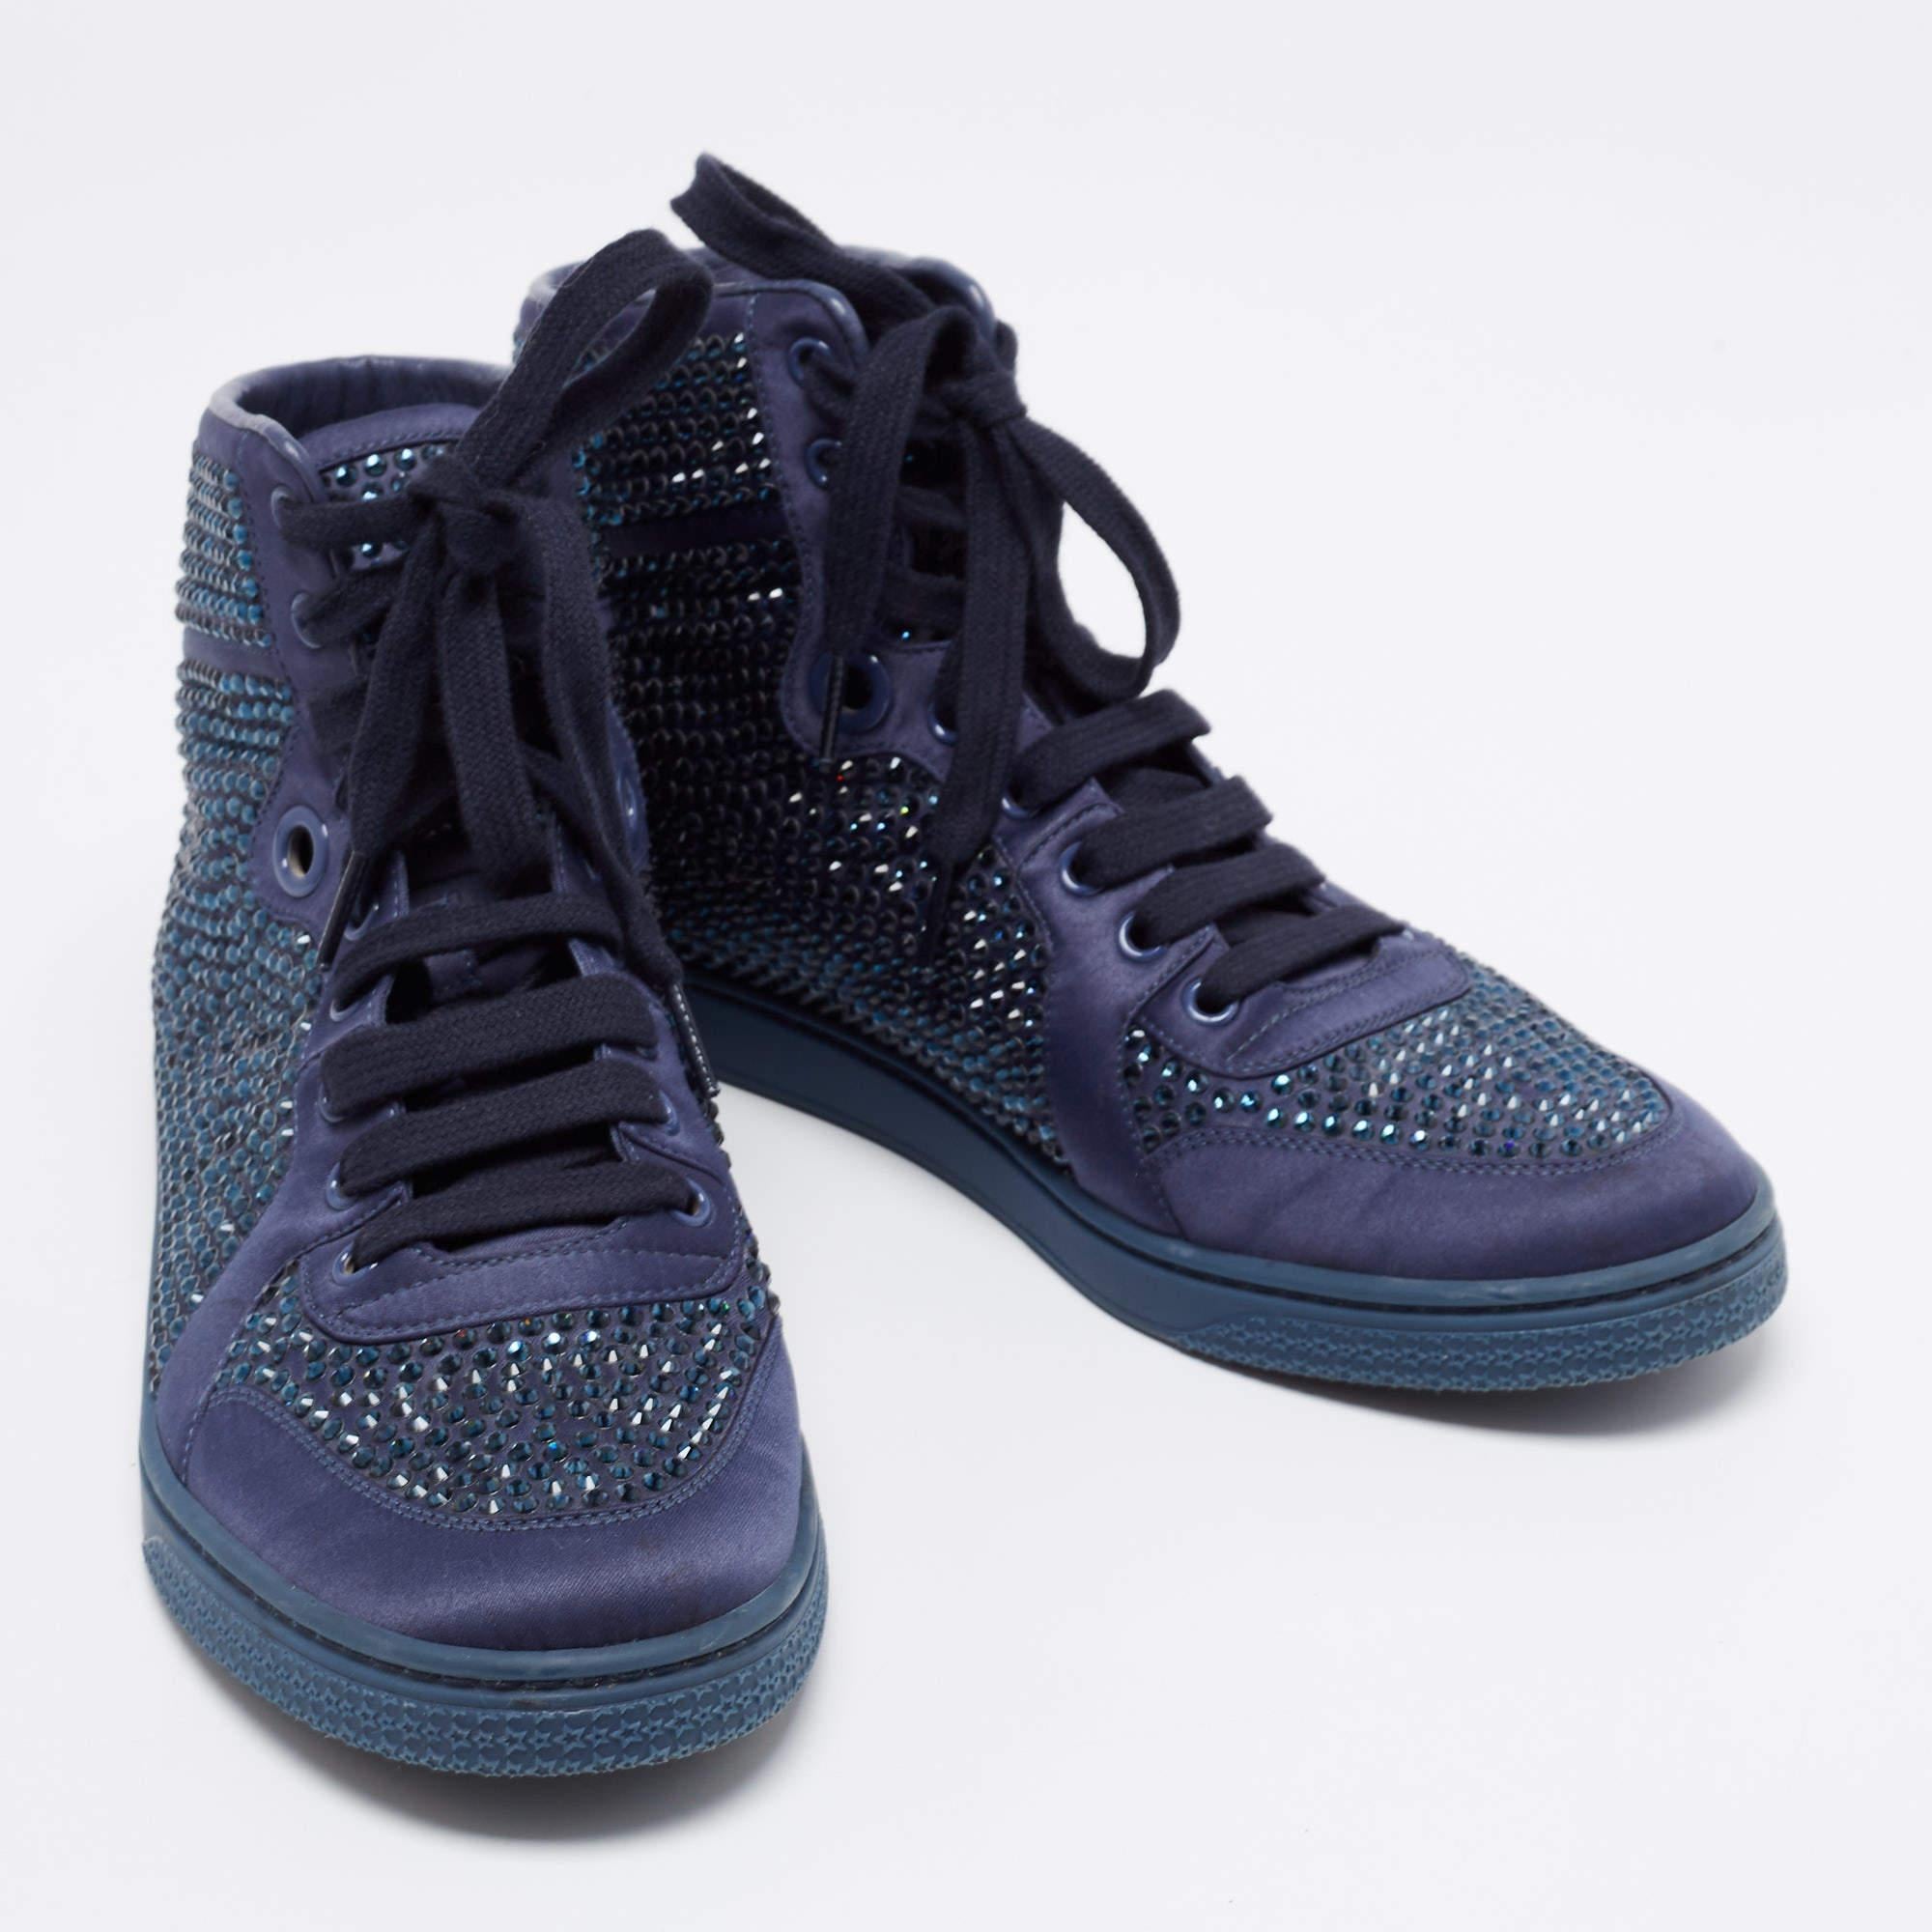 Gucci Blue Satin Crystal Embellished High Top Sneakers Size 39.5 For Sale 1